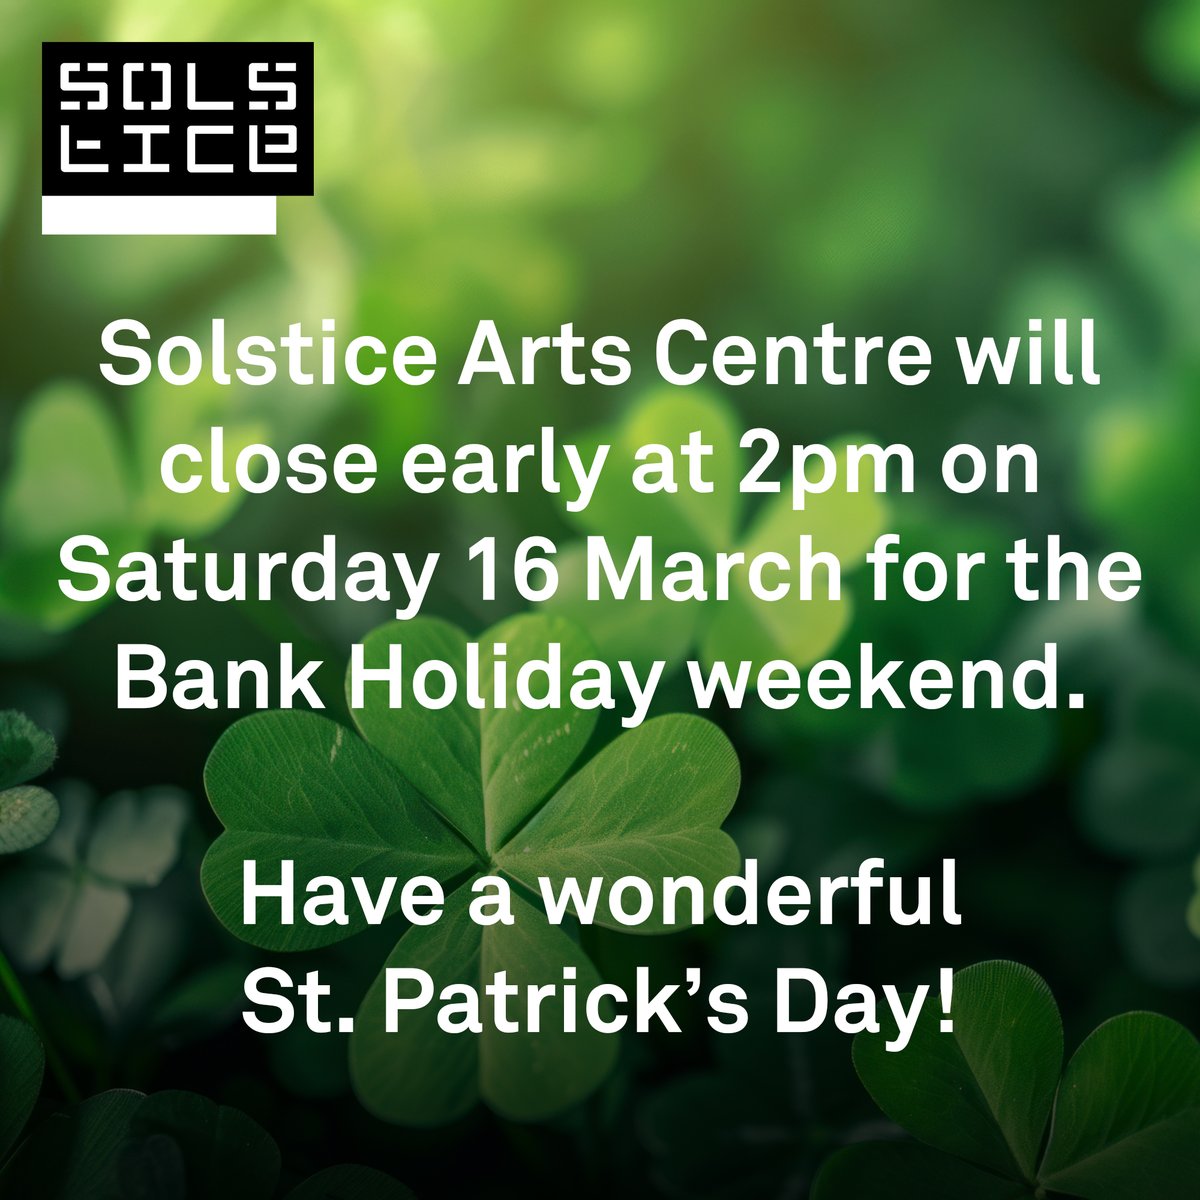 ☘ Solstice Arts Centre will close early at 2pm on Saturday 16 March for the Bank Holiday weekend and will be open again from Tuesday at our usual opening hours. We wish you all a wonderful St. Patrick’s Day!